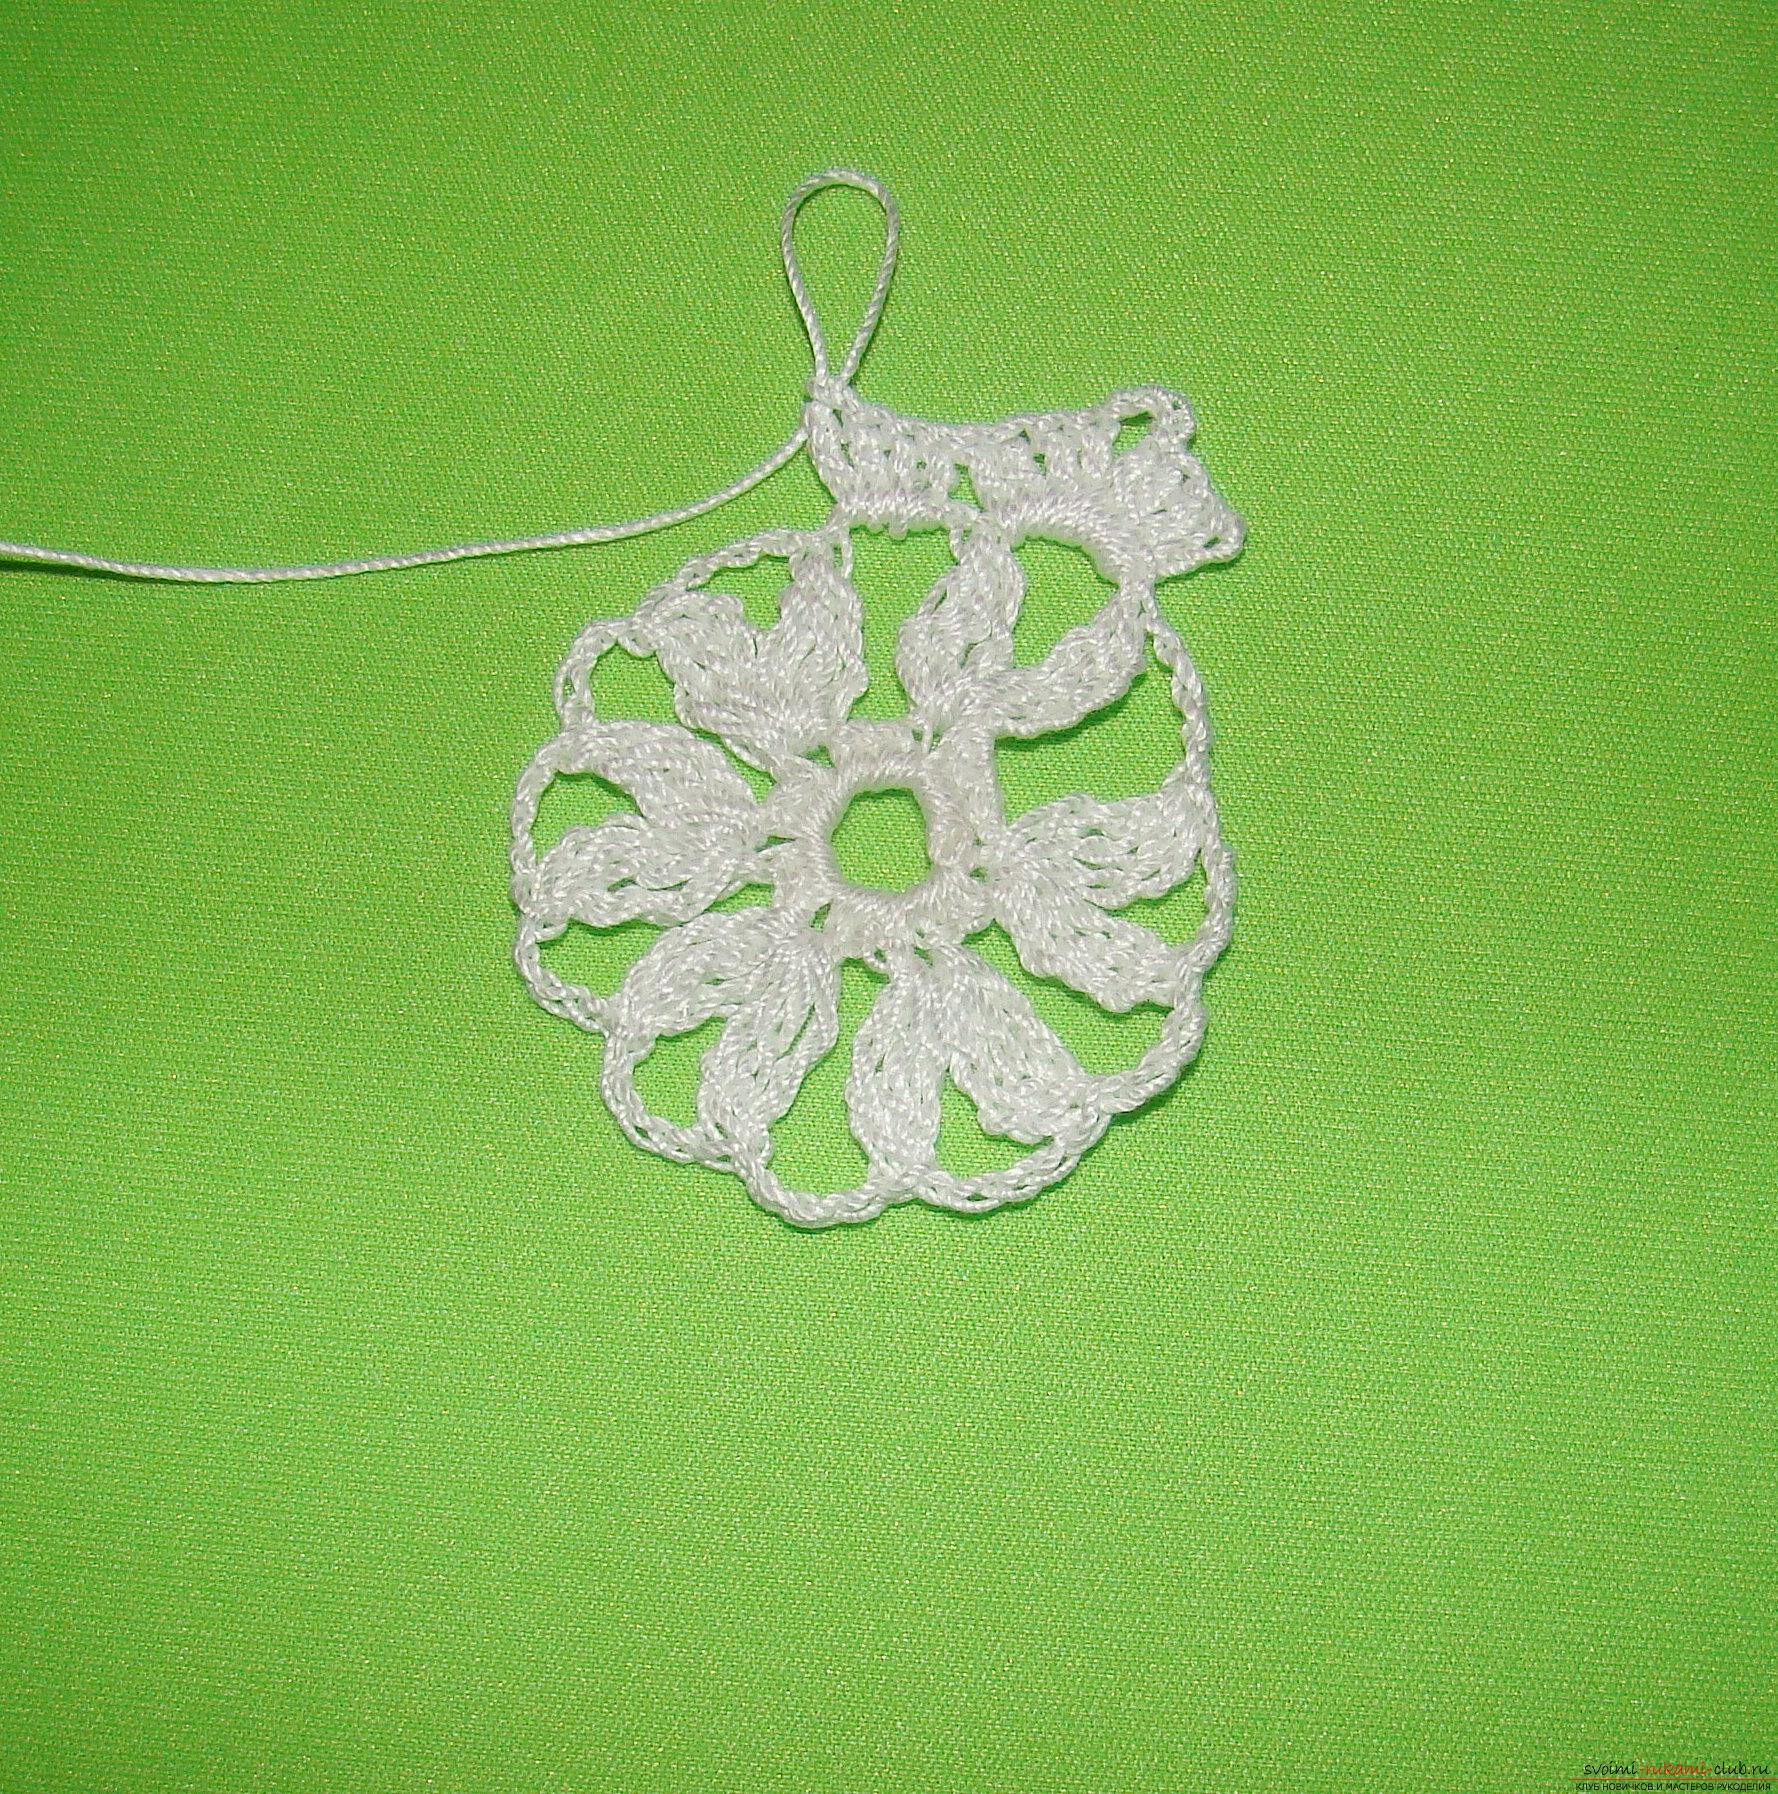 A master class with a photo and diagram will teach you how to tie snowflakes to a Christmas tree crochet. Photo №8